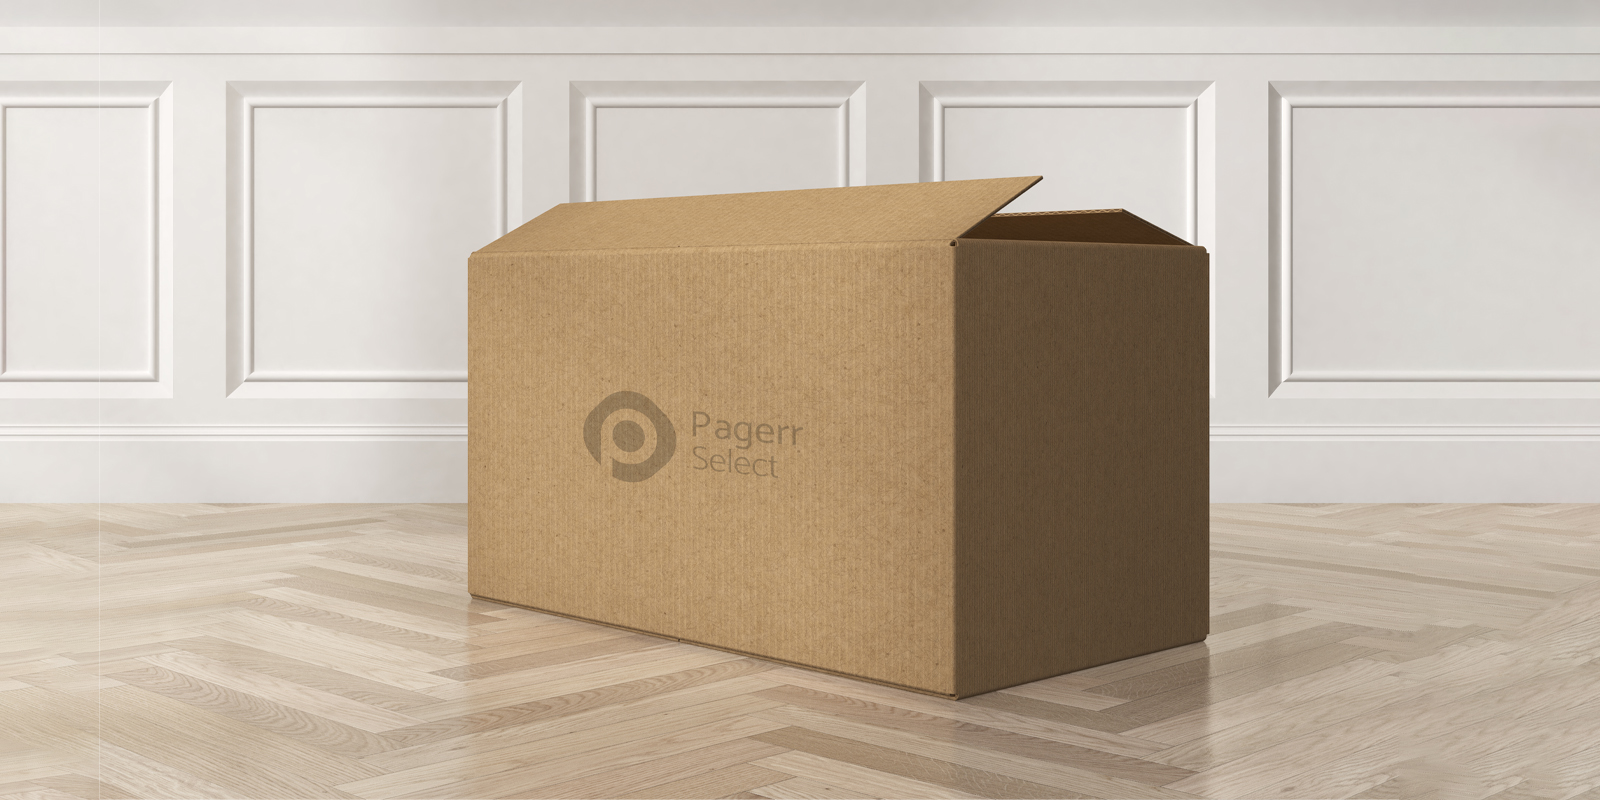 Moving boxes in Bucharest - Print with Pagerr